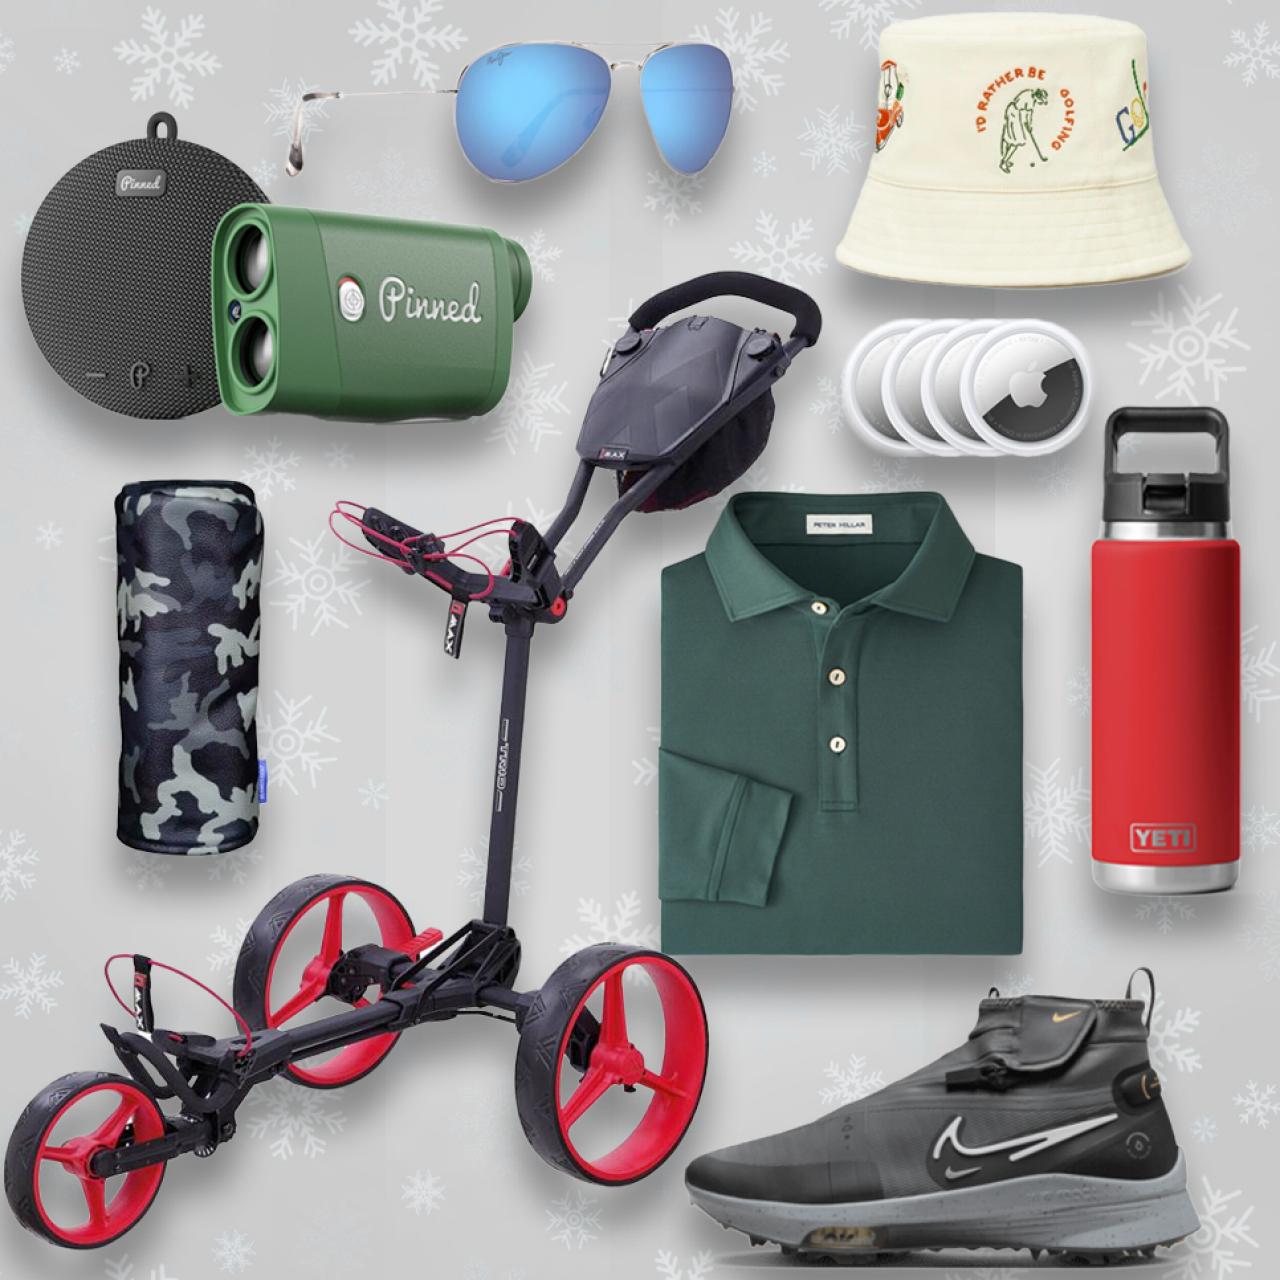 Gifts for Golfers: Last-minute gift ideas any golfer would love to receive, Golf Equipment: Clubs, Balls, Bags